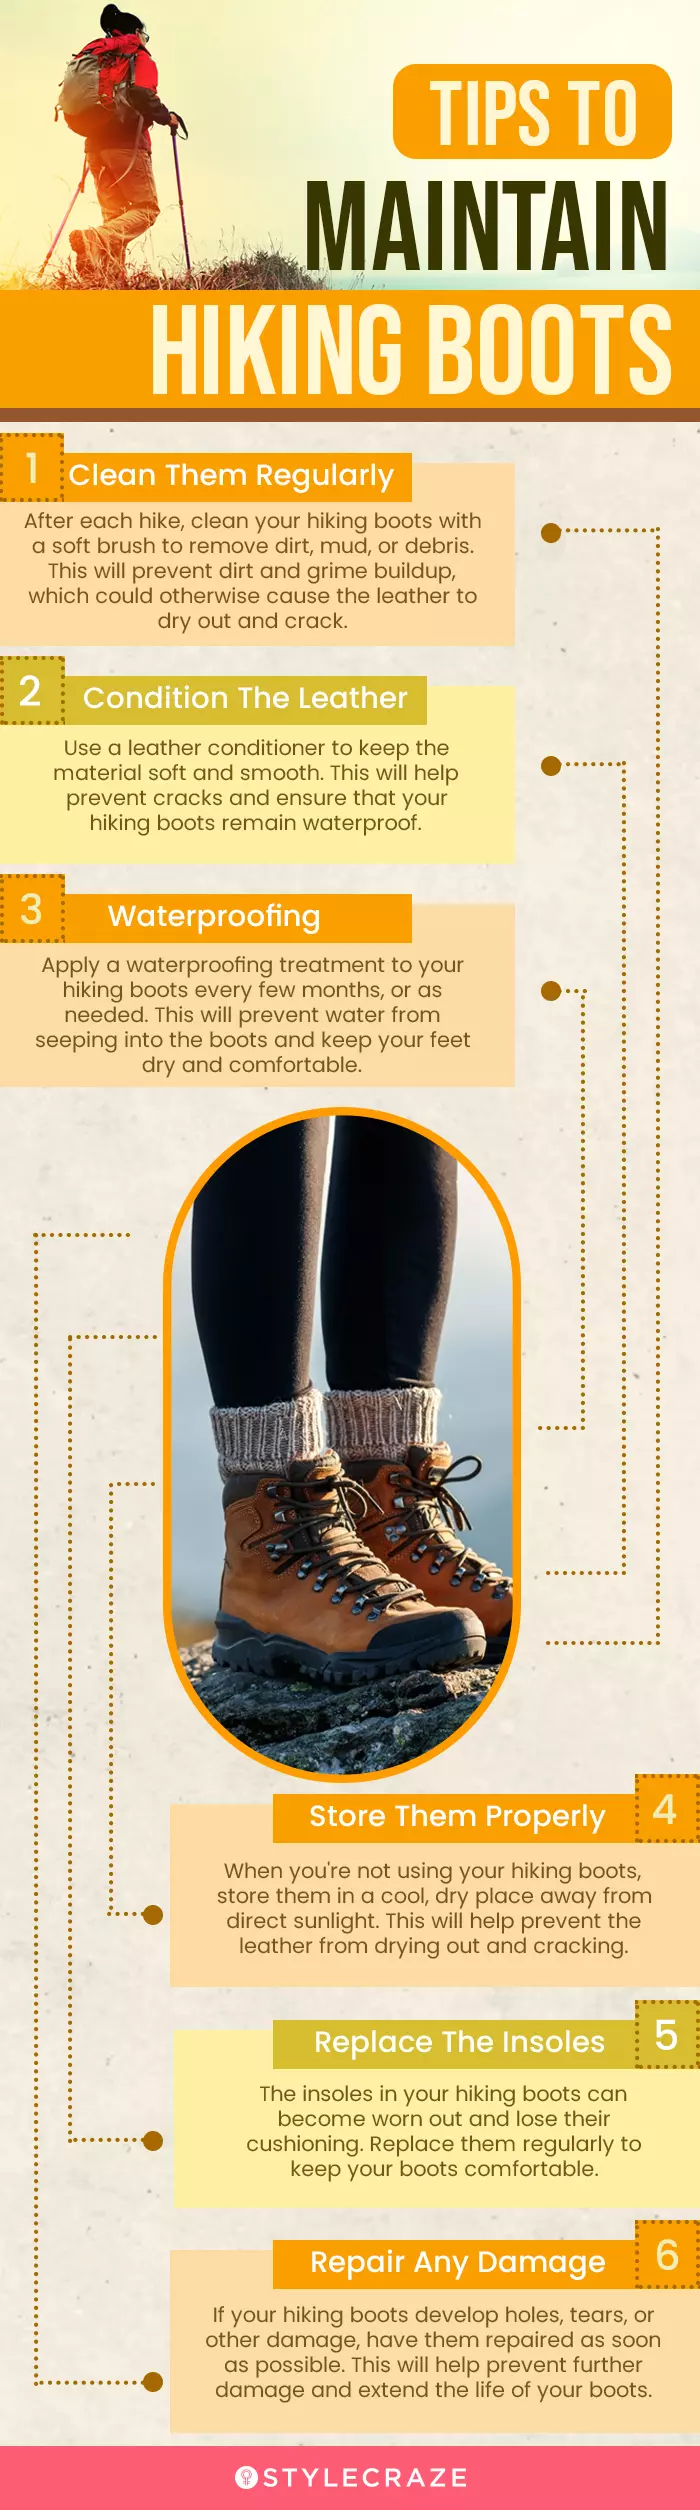 Tips To Maintain Hiking Boots (infographic)